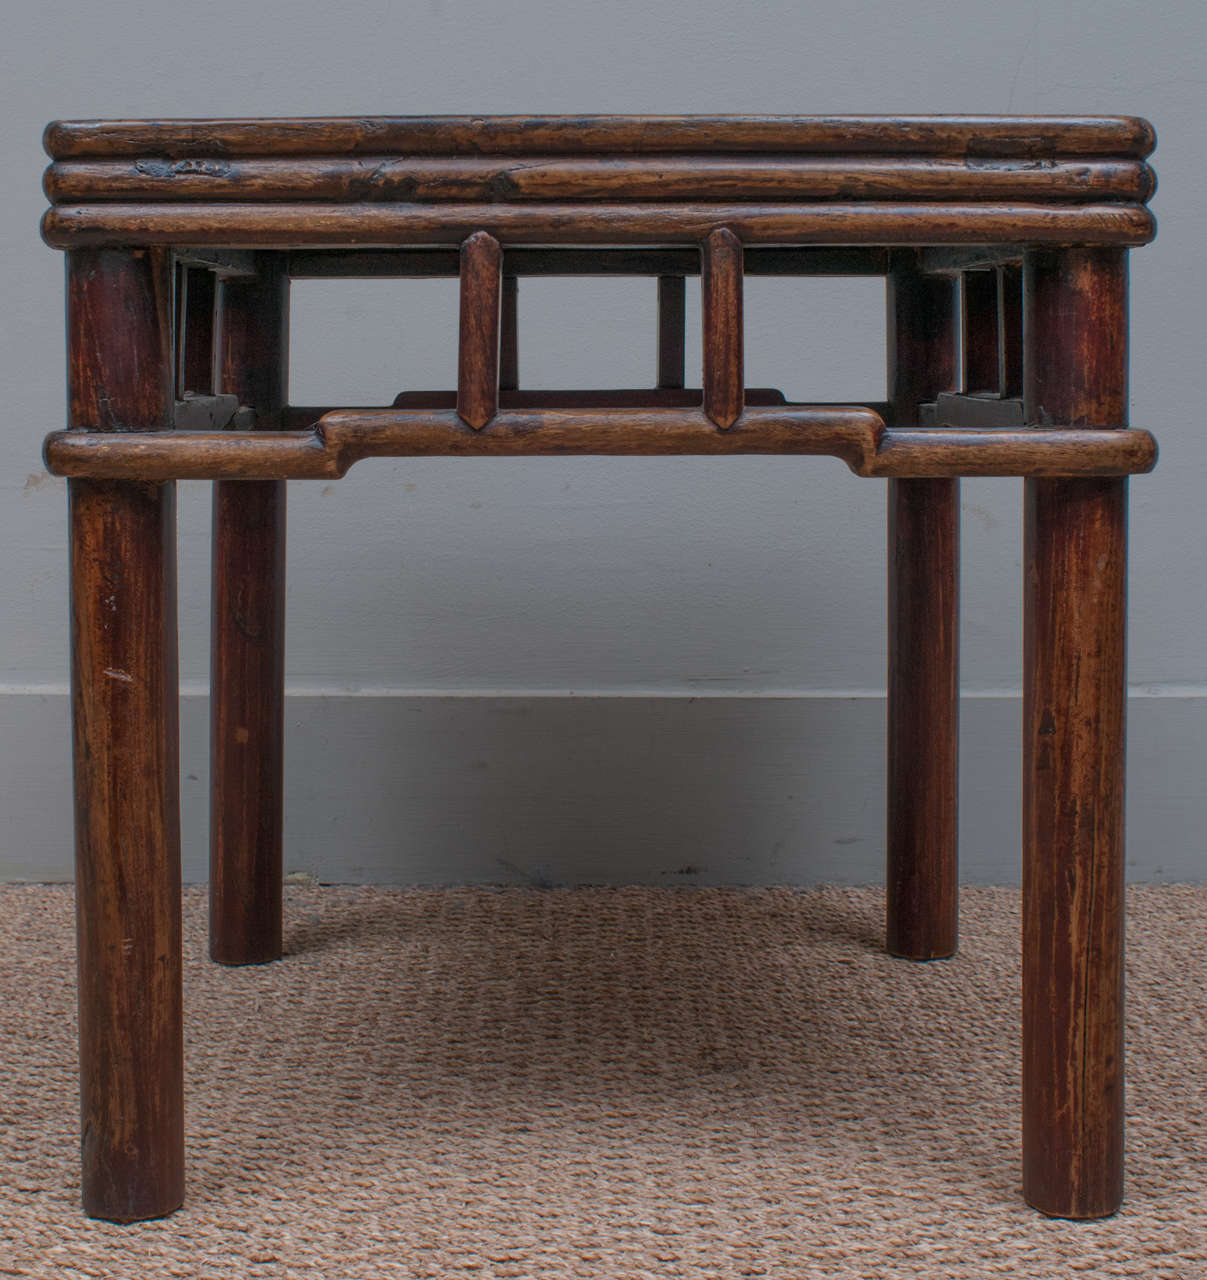 Low, square occasional table, elmwood, mortise and tenon construction, with well-worn patina.